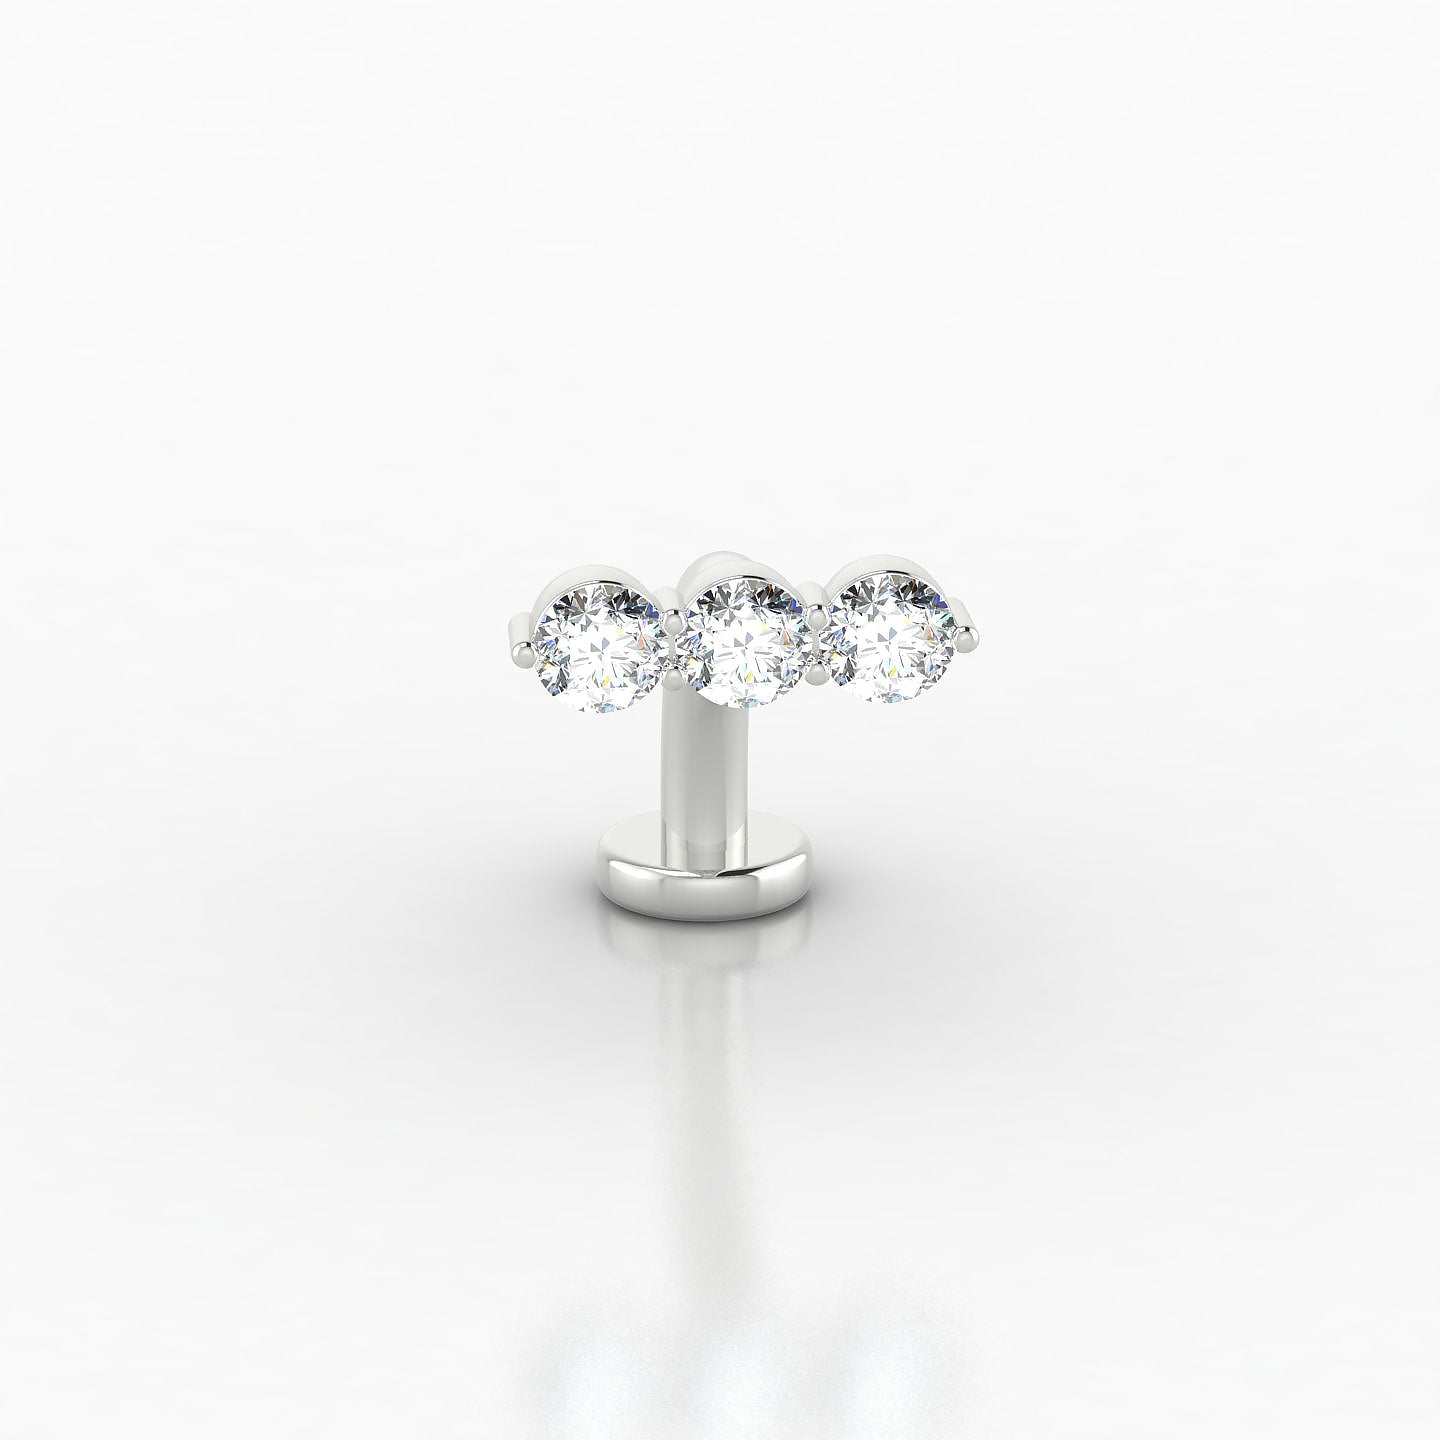 Ma'at | 18k White Gold 10 mm 9 mm Trilogy Diamond Floating Navel Piercing